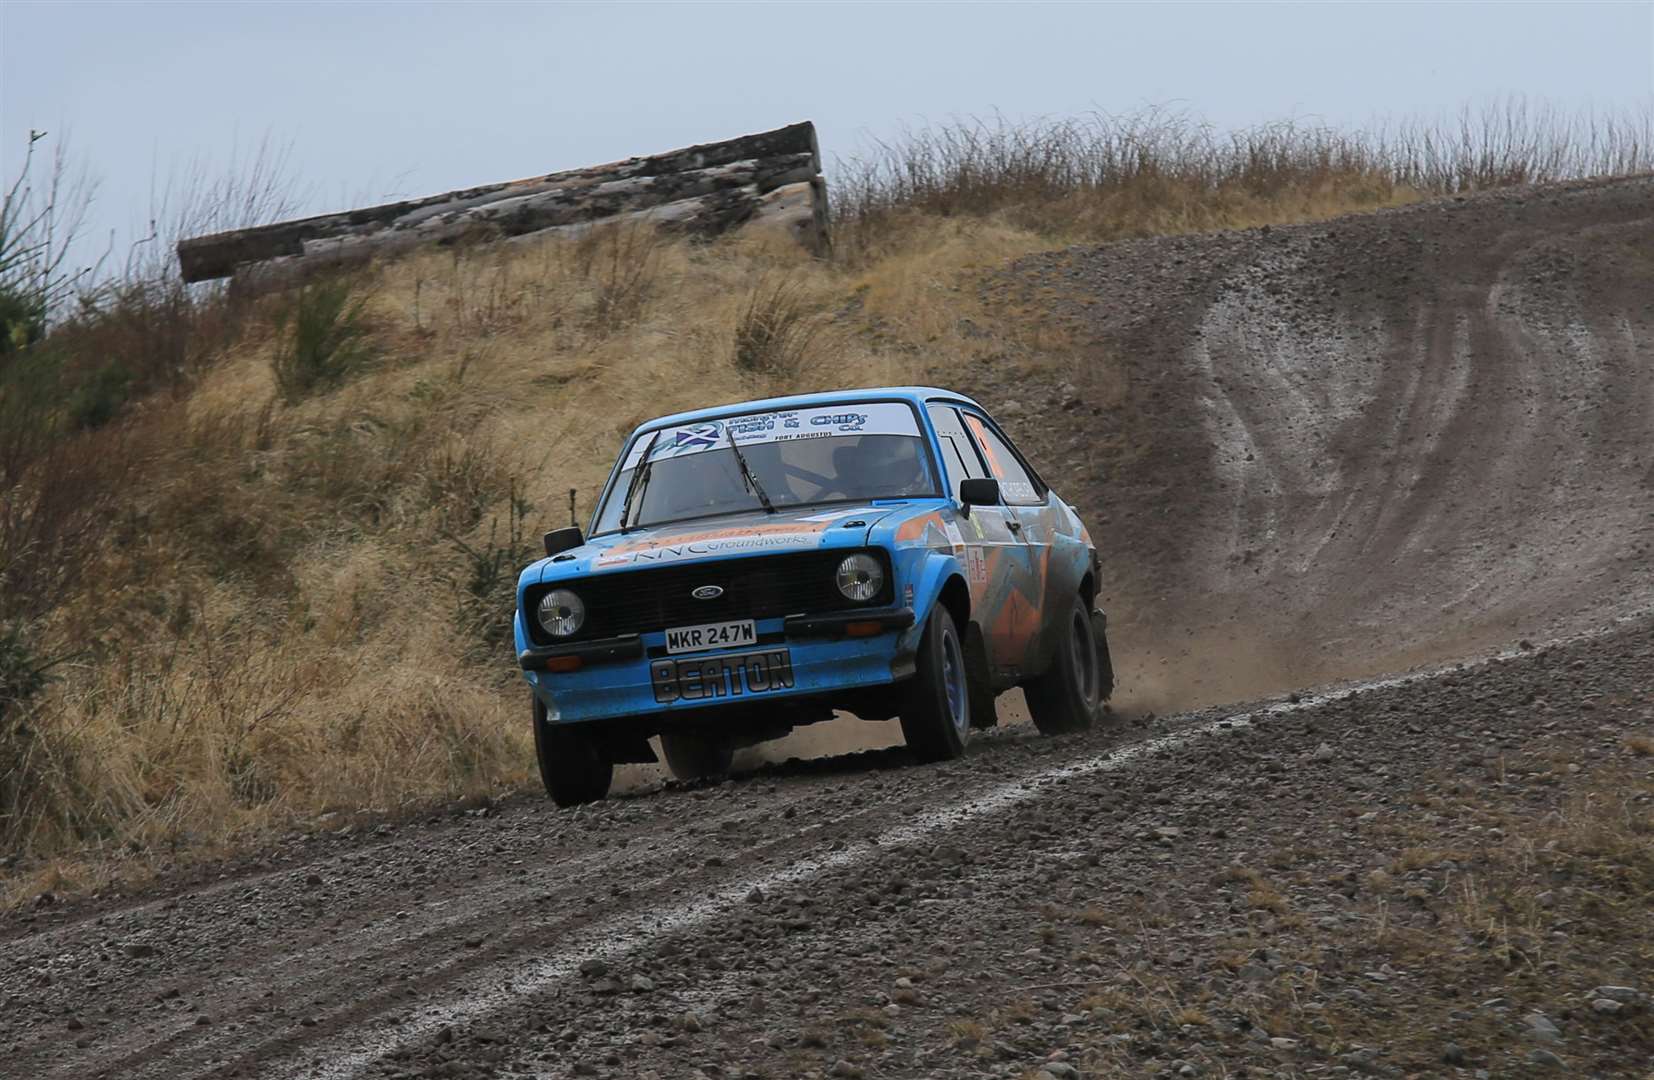 Keir Beaton is the first Star Driver Award winner of the Scottish Rally Championship season for his performance in the Snowman Rally. Image: West Coast Photos